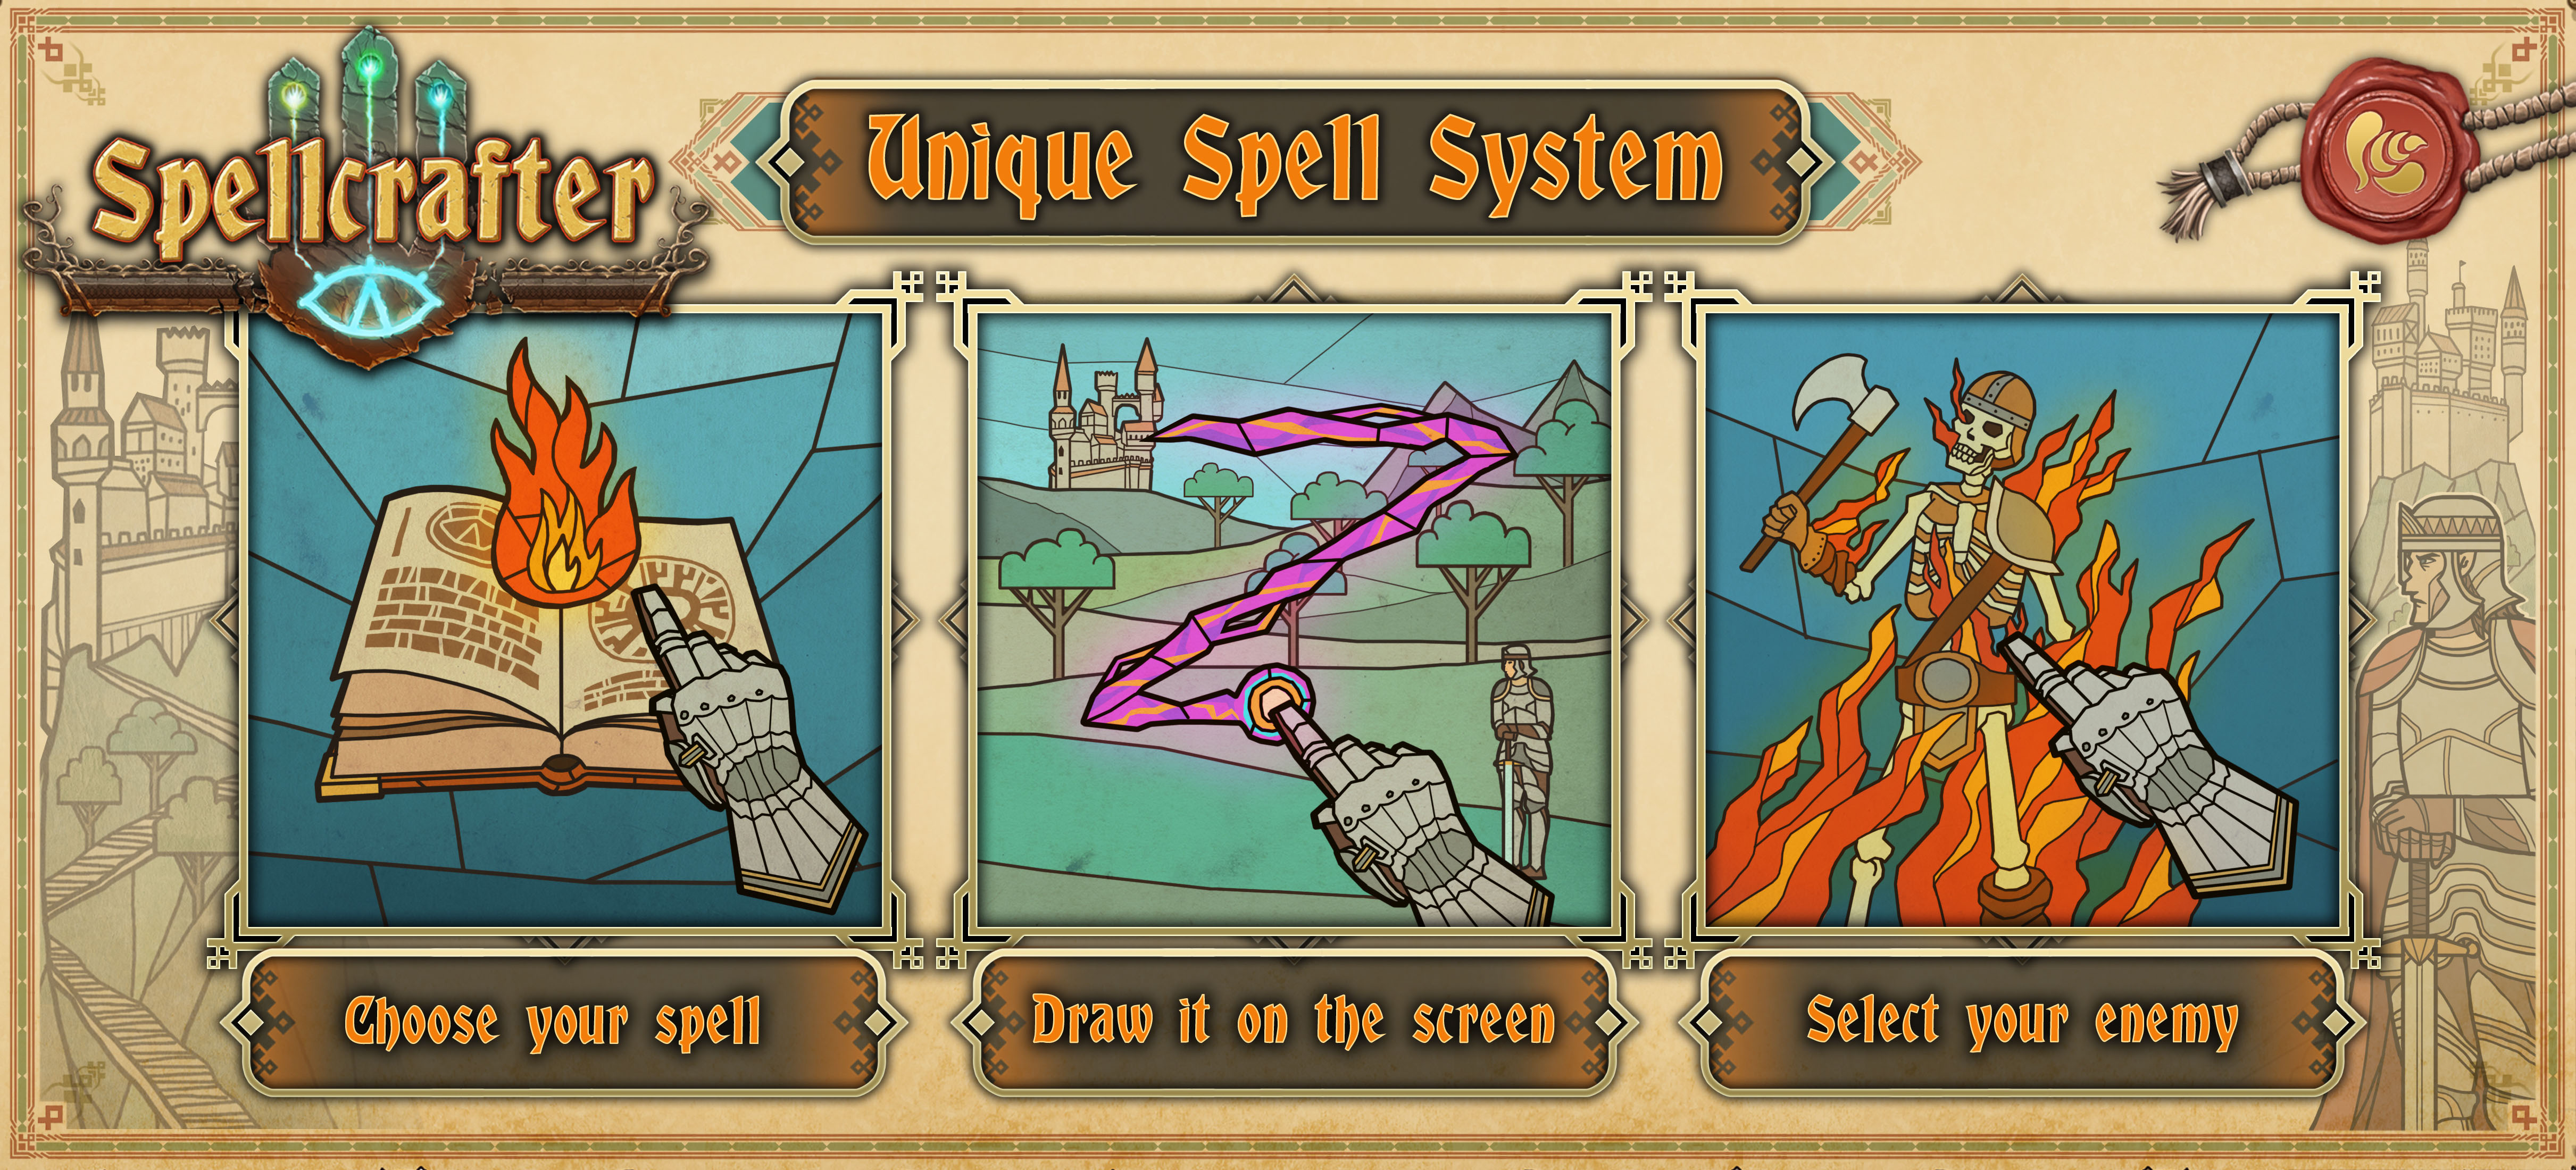 Spellcrafter Hits Greenlight, Introduces Gesture-Based Spellcasting